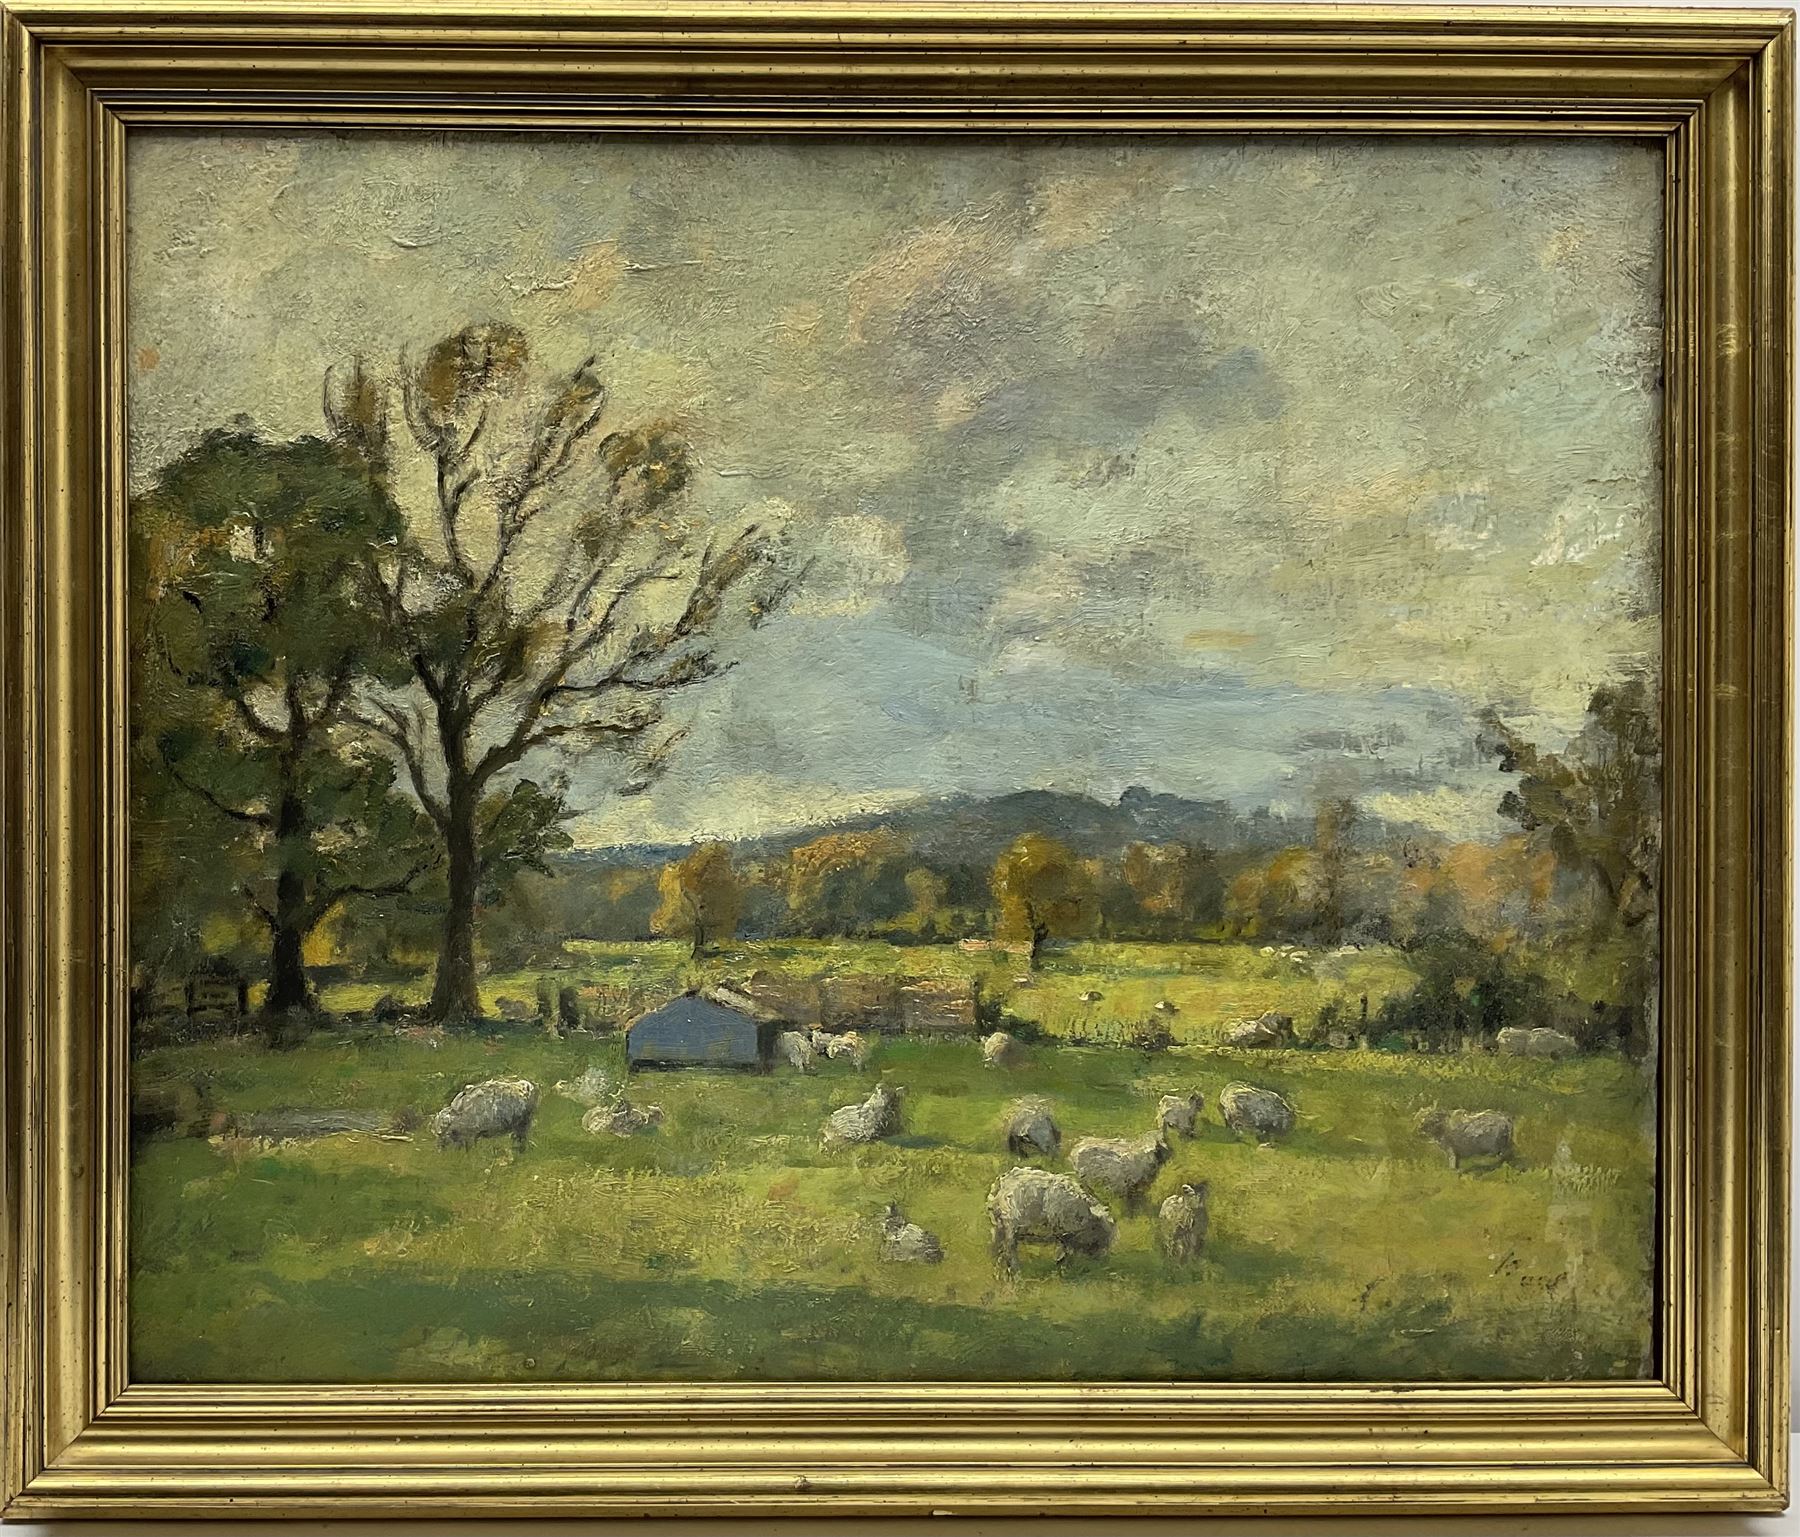 English School (Early 20th century): Sheep in Pastoral Landscape - Image 2 of 3